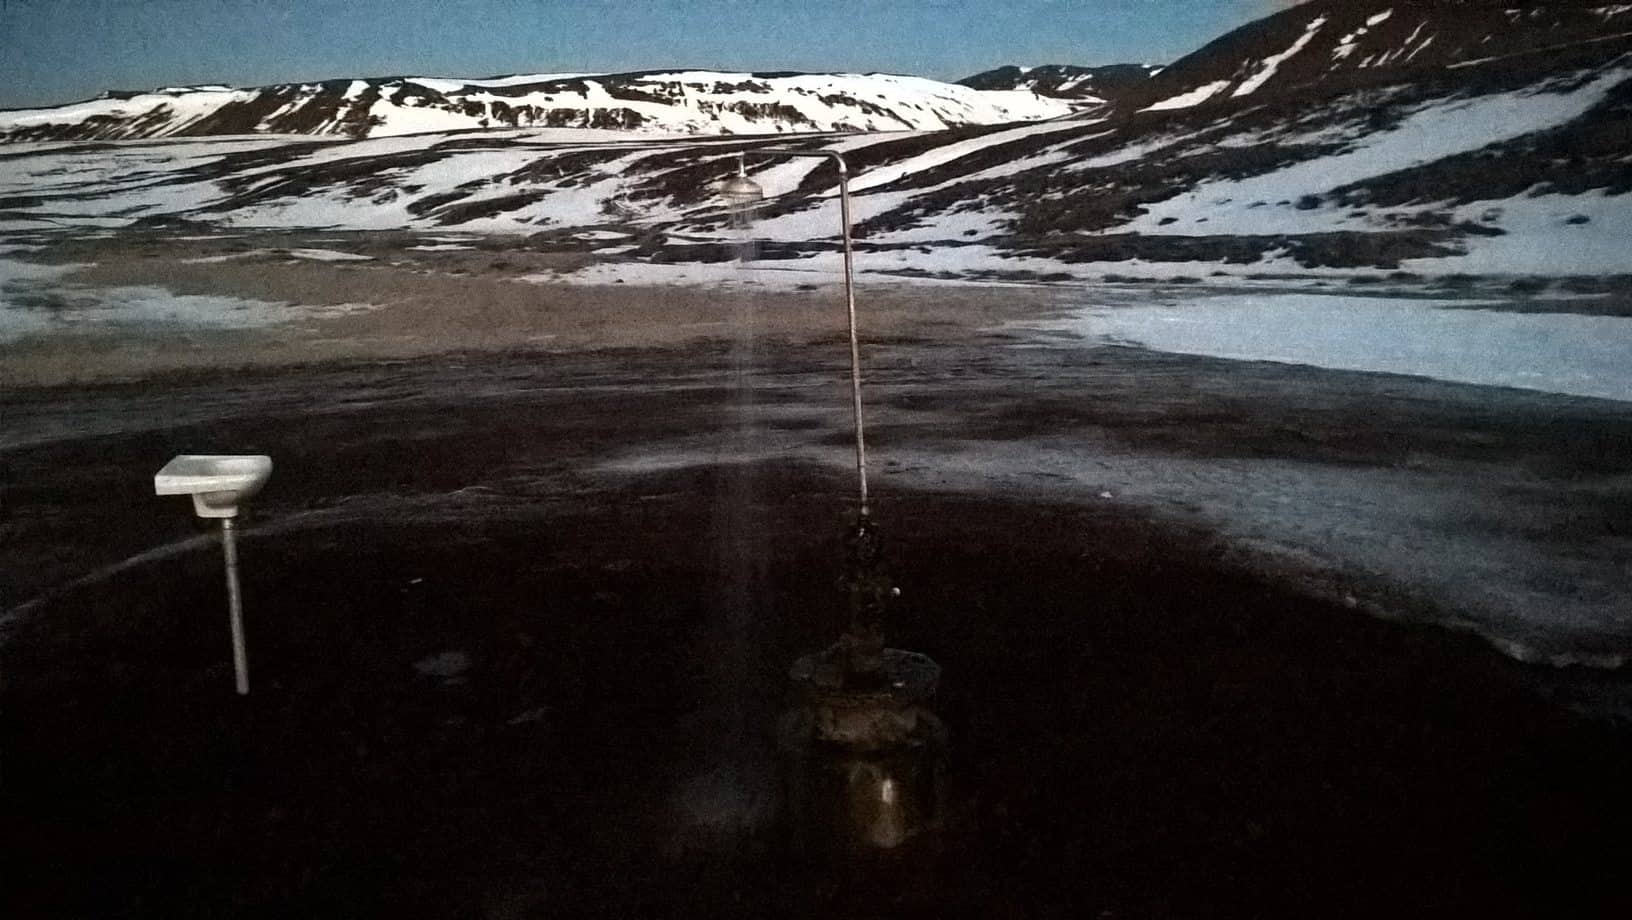 The hot shower by the road in Iceland